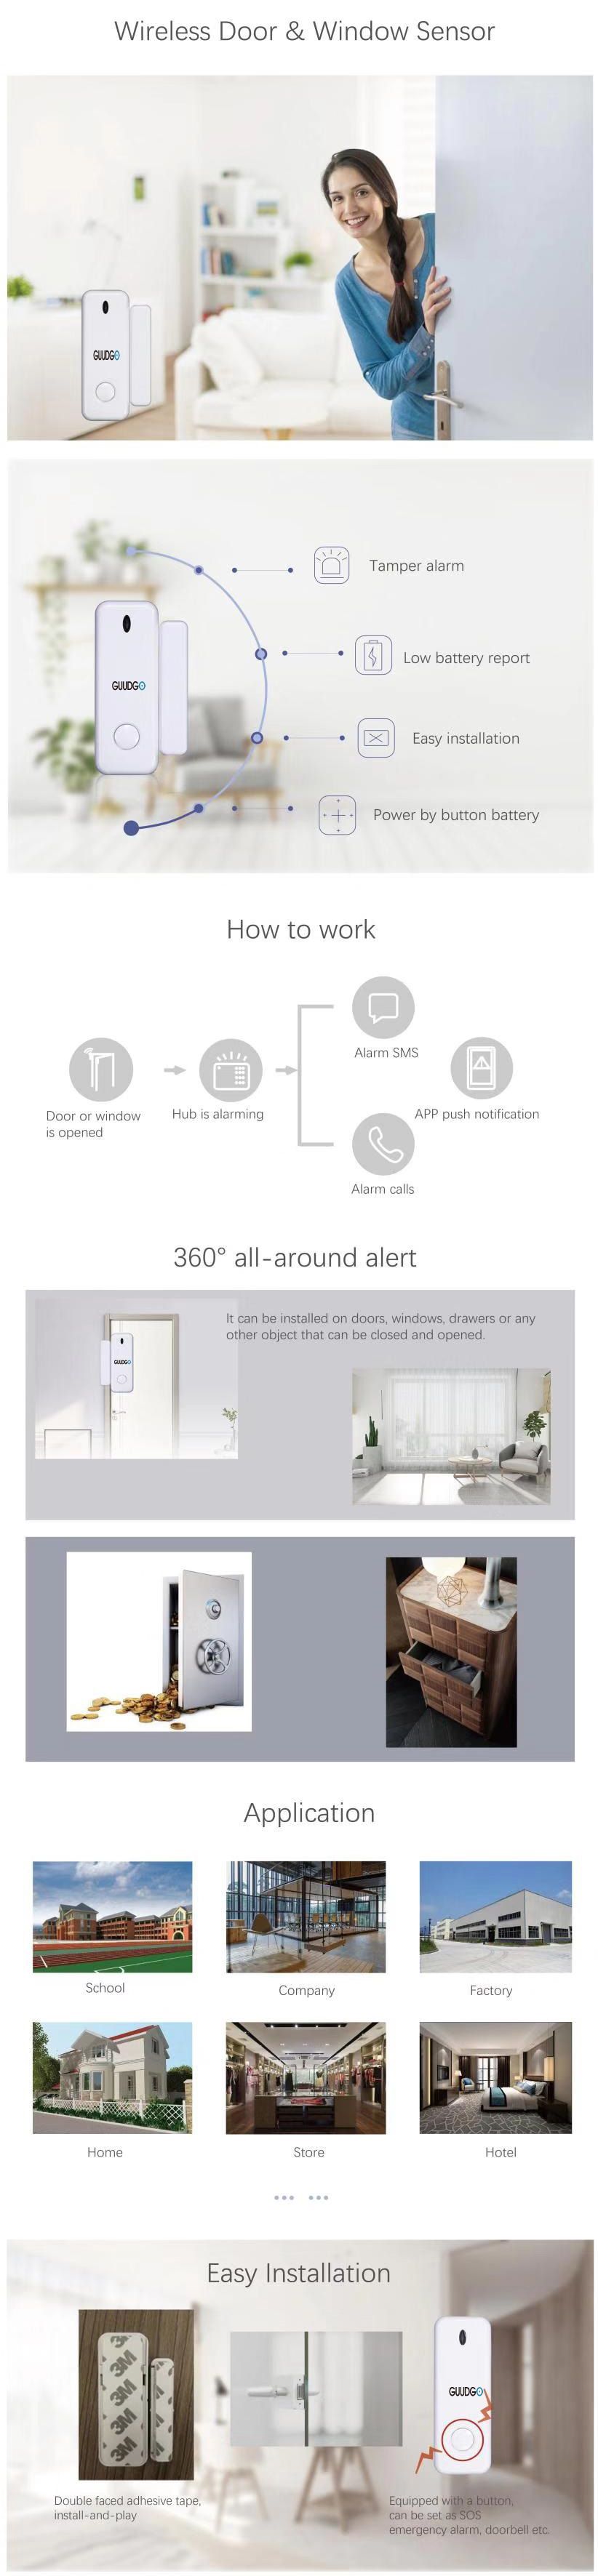 GUUDGO-Tuya-APP-Smart-WiFi-GSM-Home-Security-Alarm-System-Detector-Home-Alarm-433MHz-Compatible-With-1601246